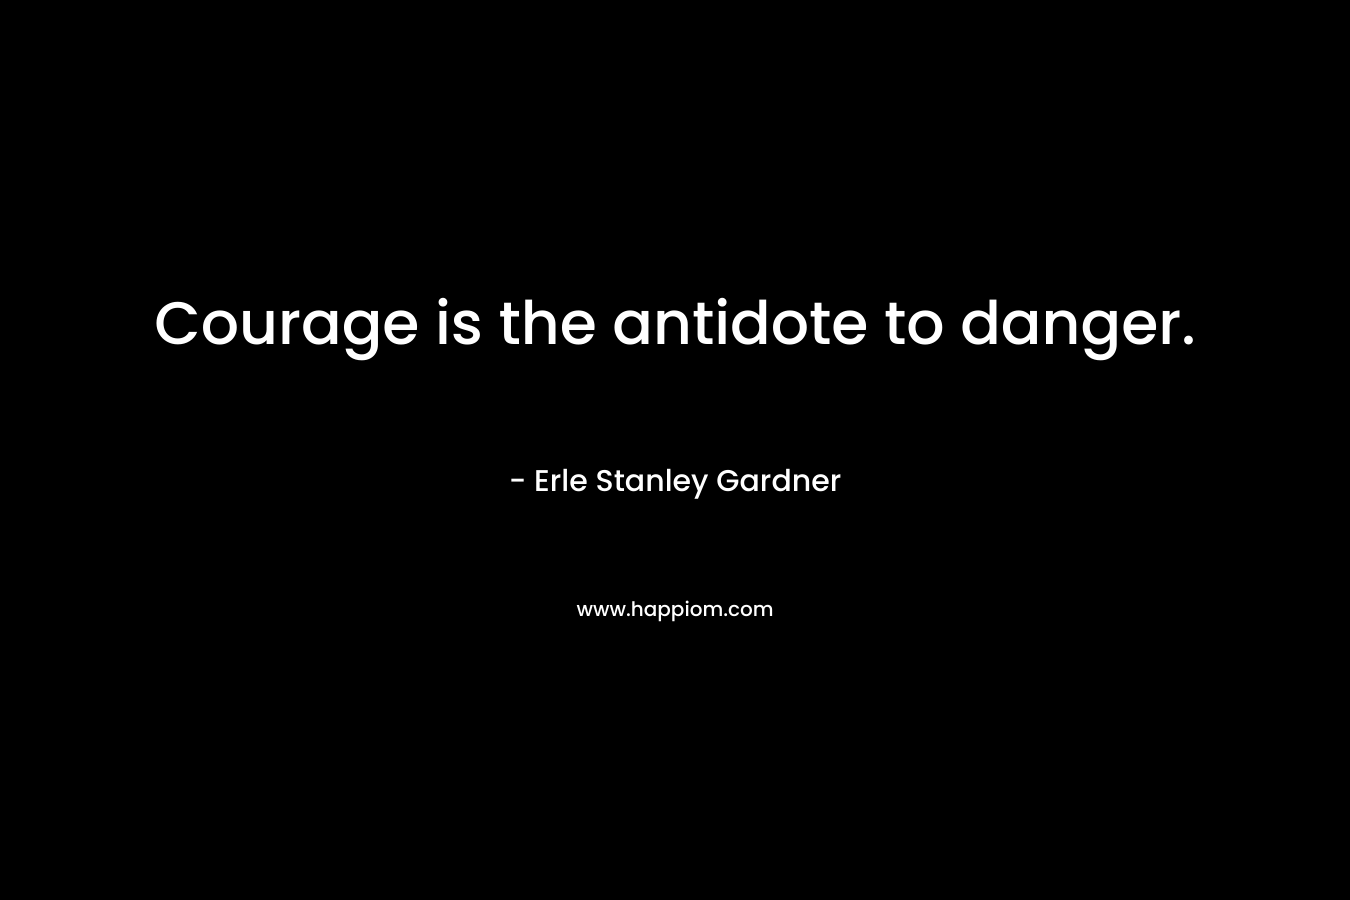 Courage is the antidote to danger. – Erle Stanley Gardner